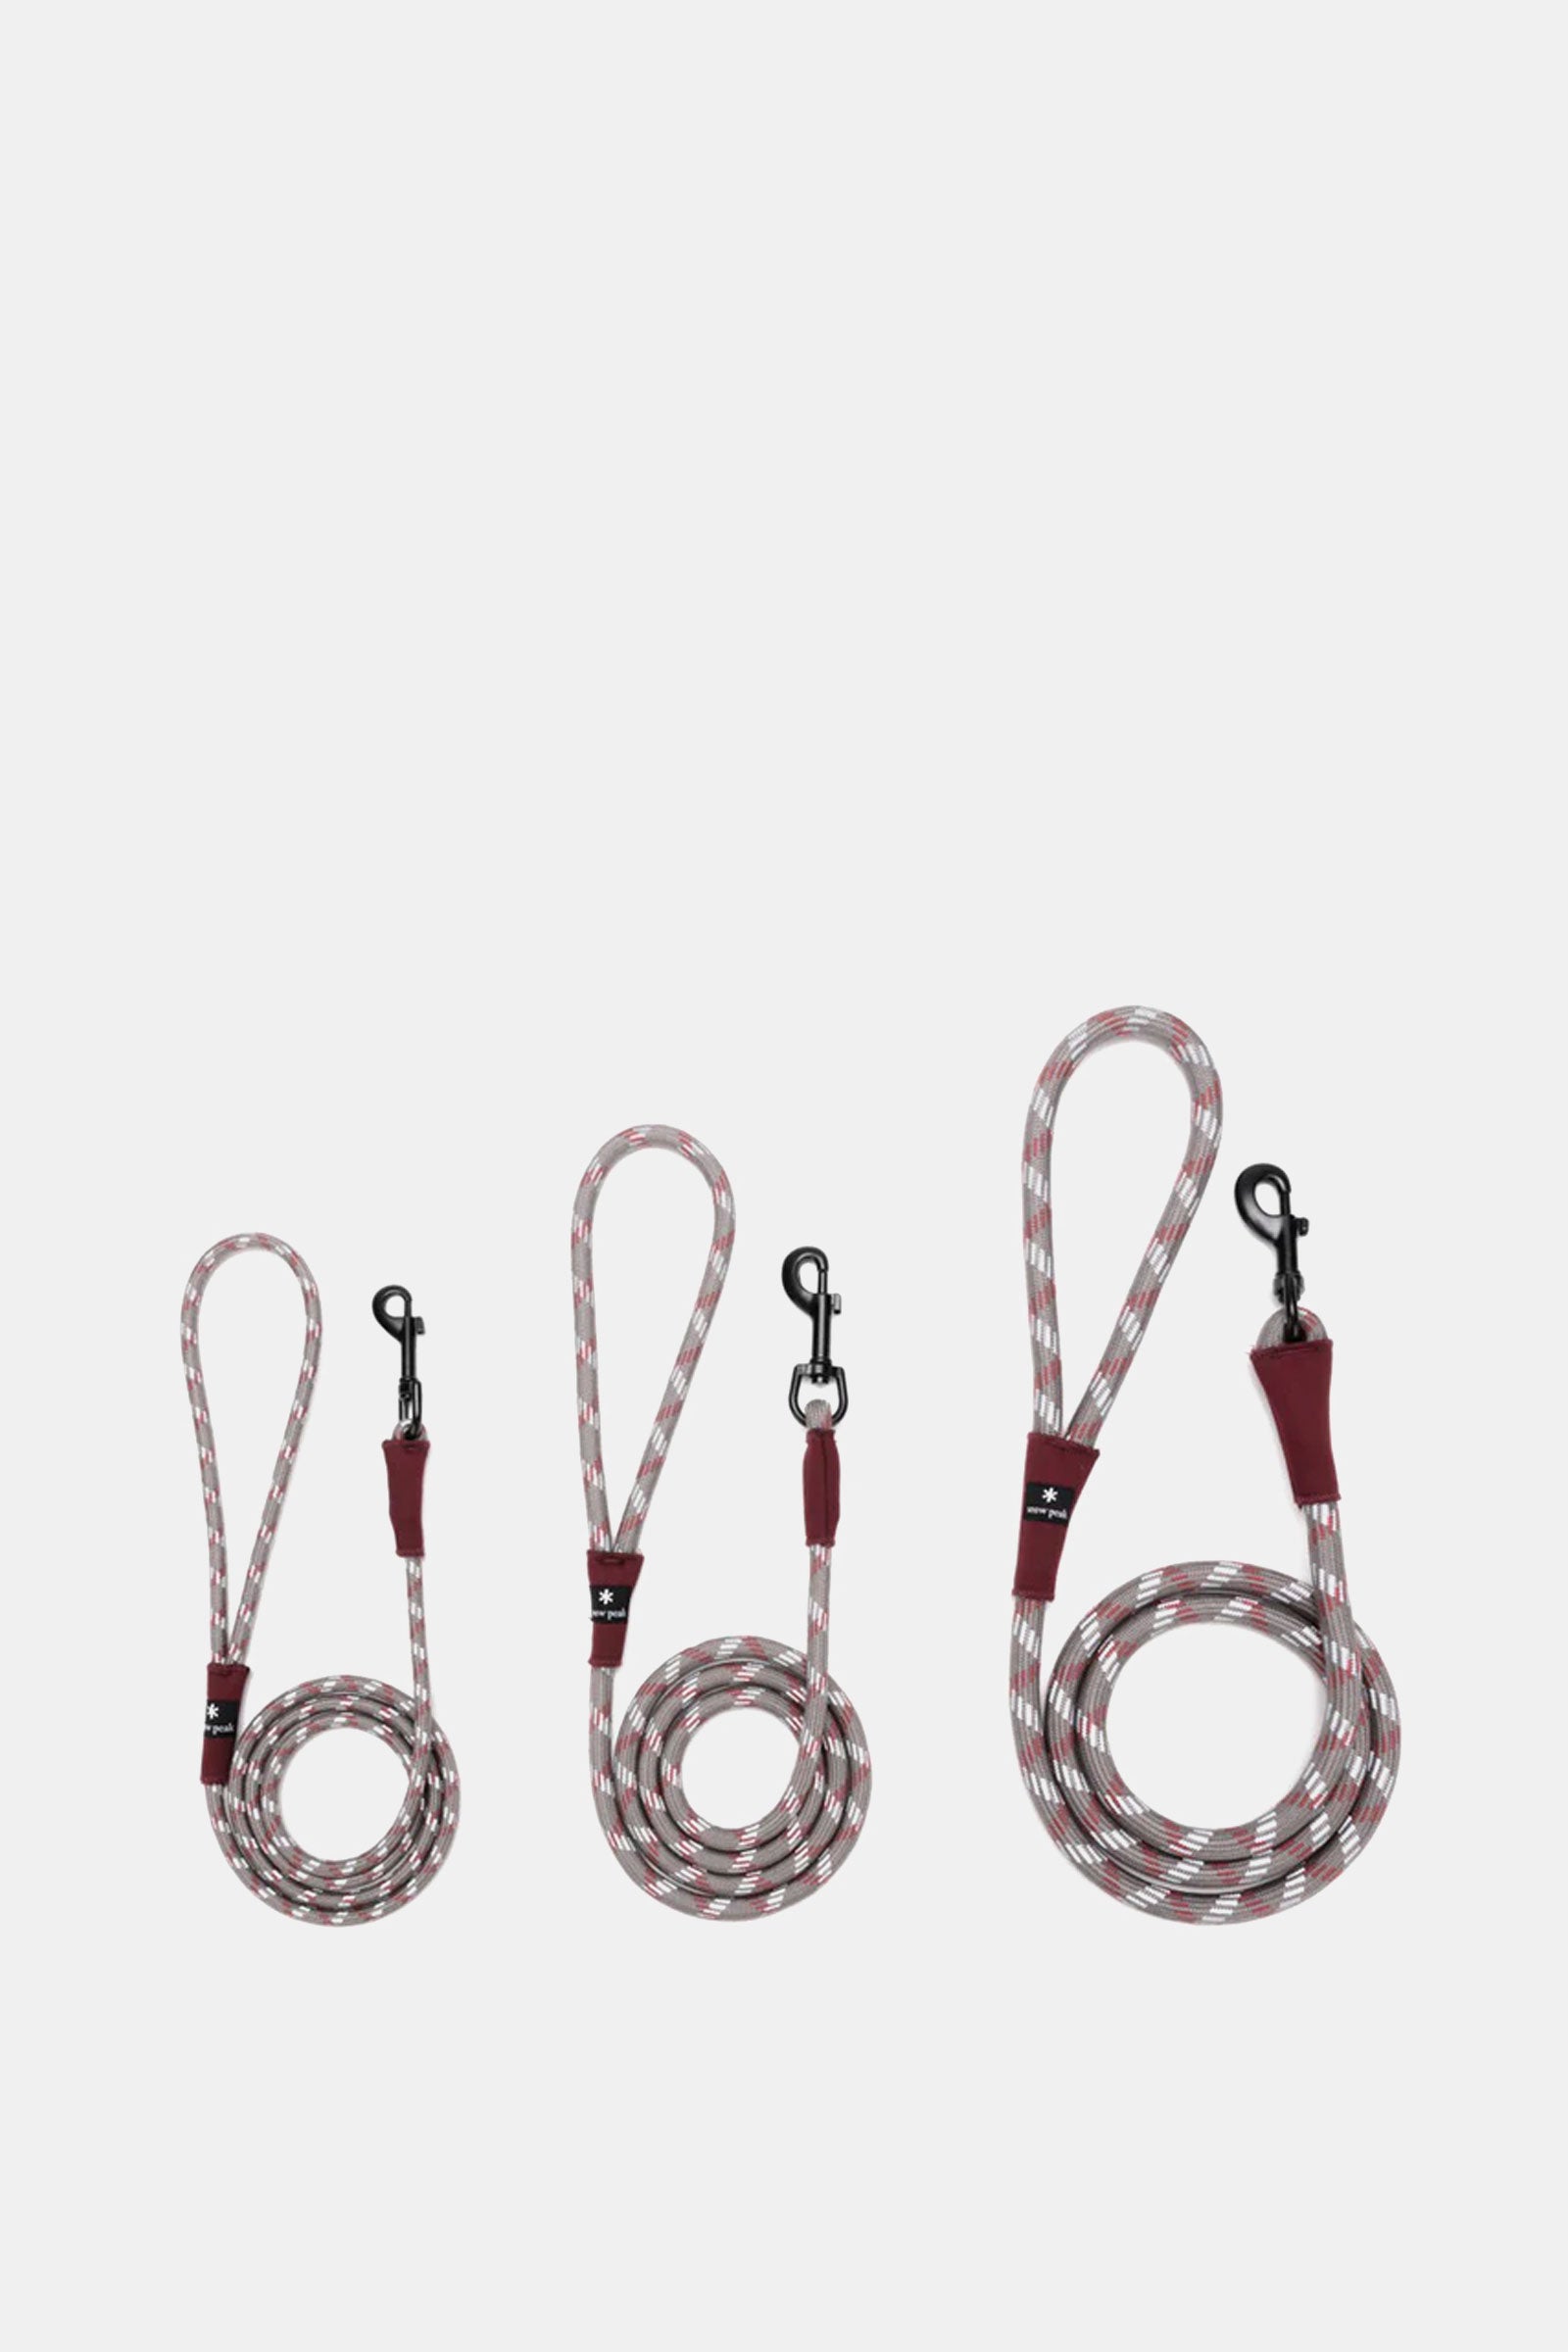 SP DOG LEAD S